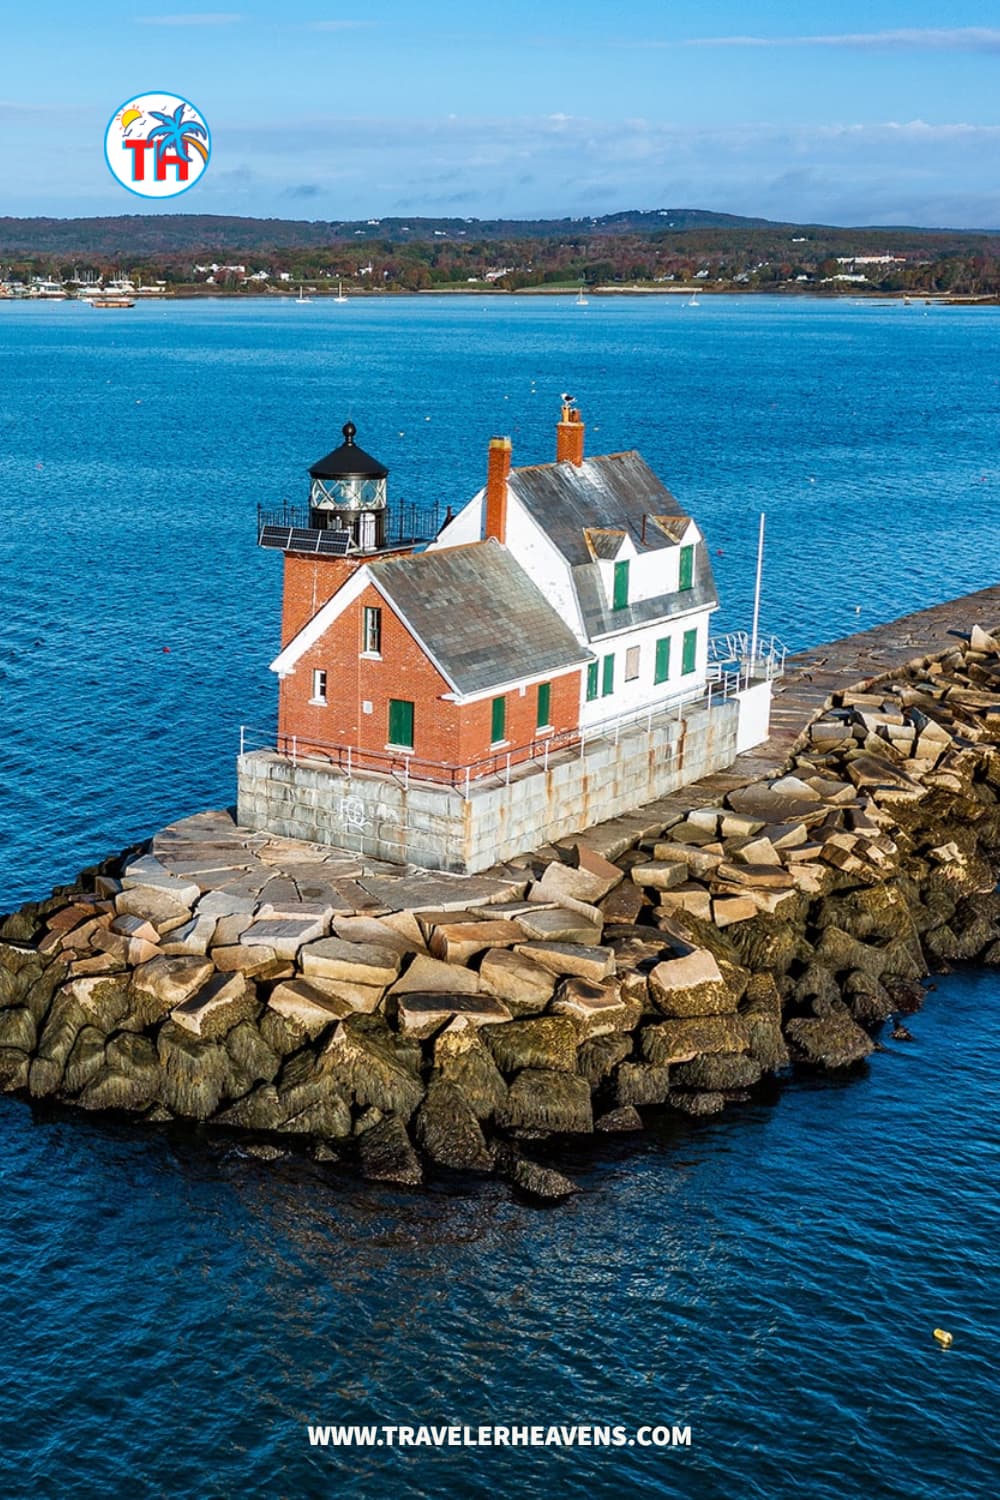 Beautiful Destinations, Best Places to Visit in Maine, Travel to Maine, USA, Visit Maine